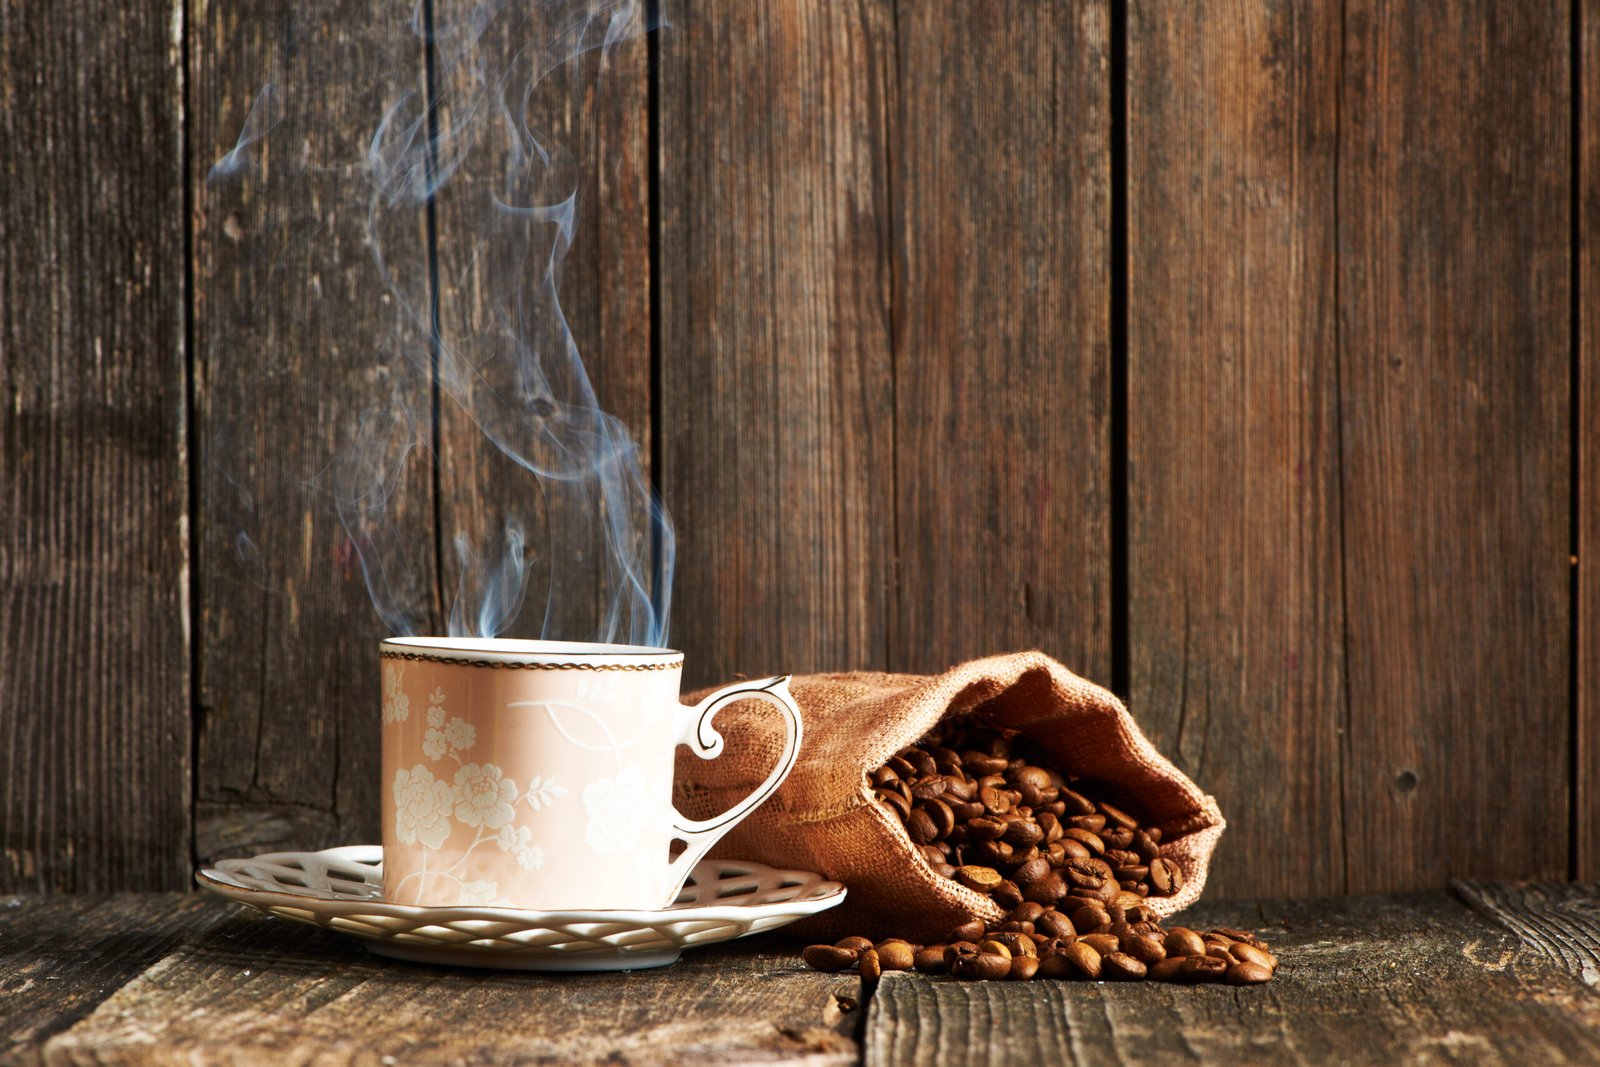 Hot cup of coffee with coffee beans